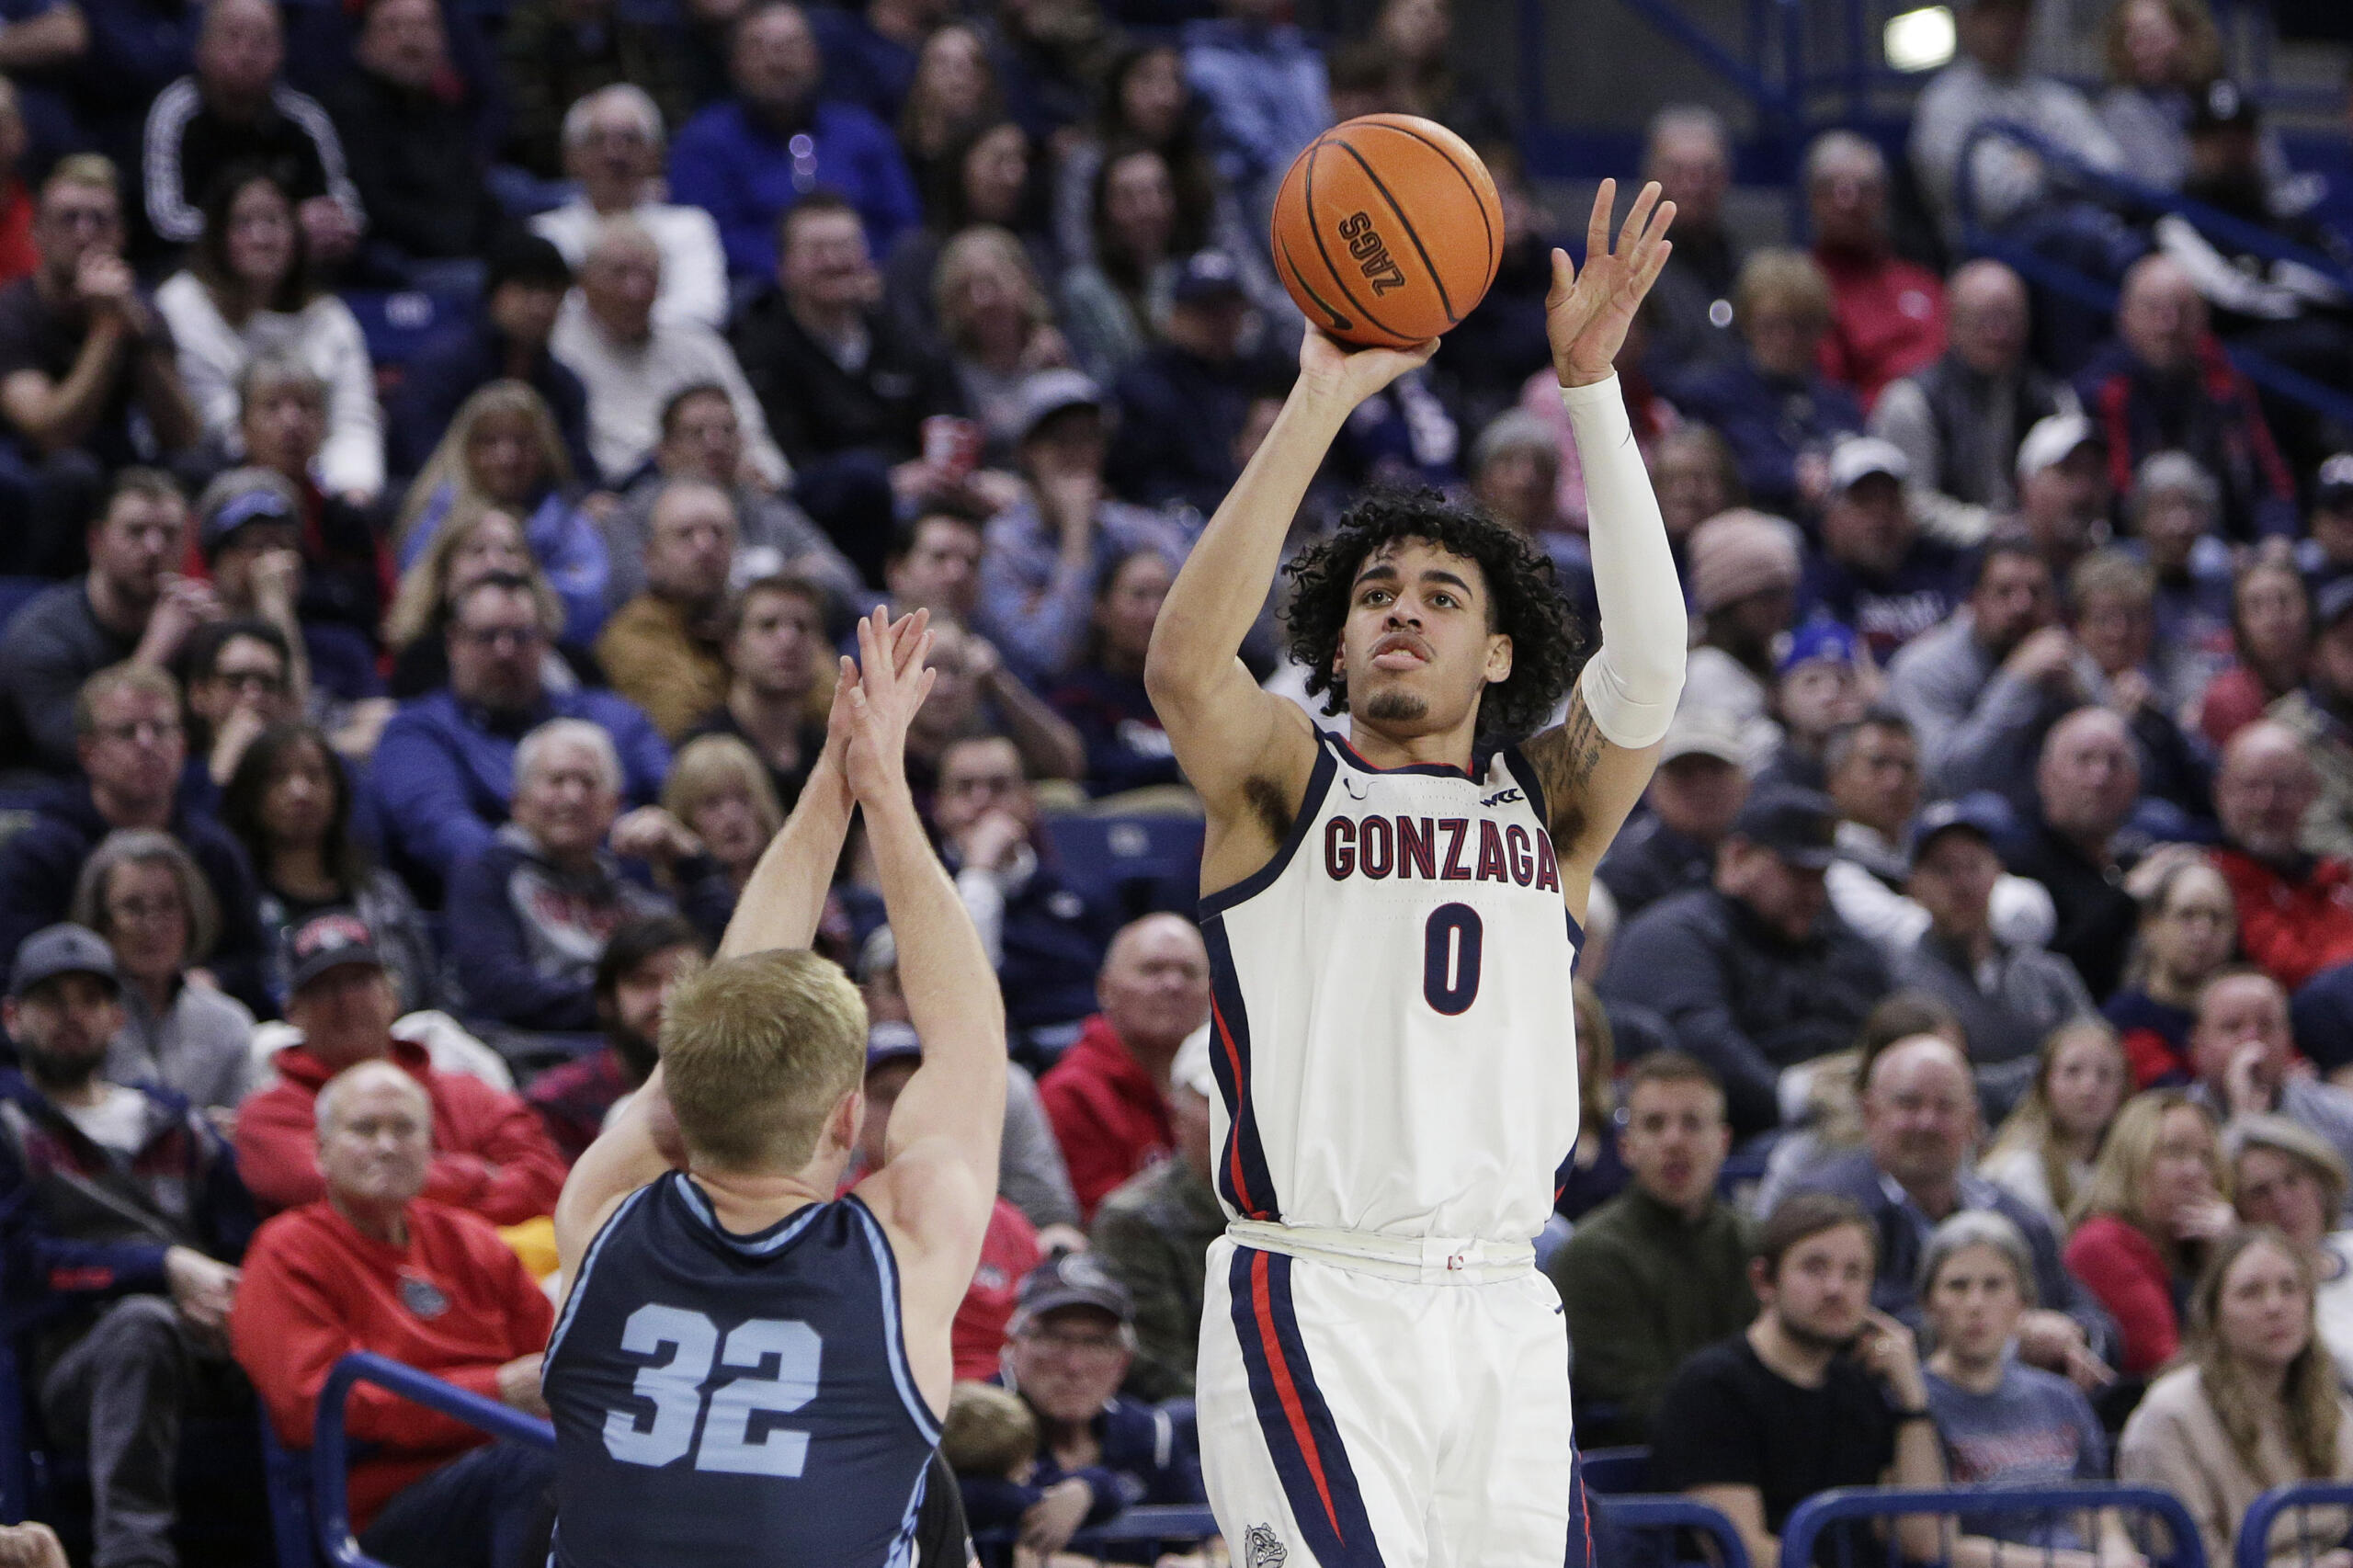 Gonzaga guard Julian Strawther (0) shoots while defended by San Diego guard Dominic Muncey (32) during the second half of an NCAA college basketball game Thursday, Feb. 23, 2023, in Spokane, Wash. Gonzaga won 97-72.